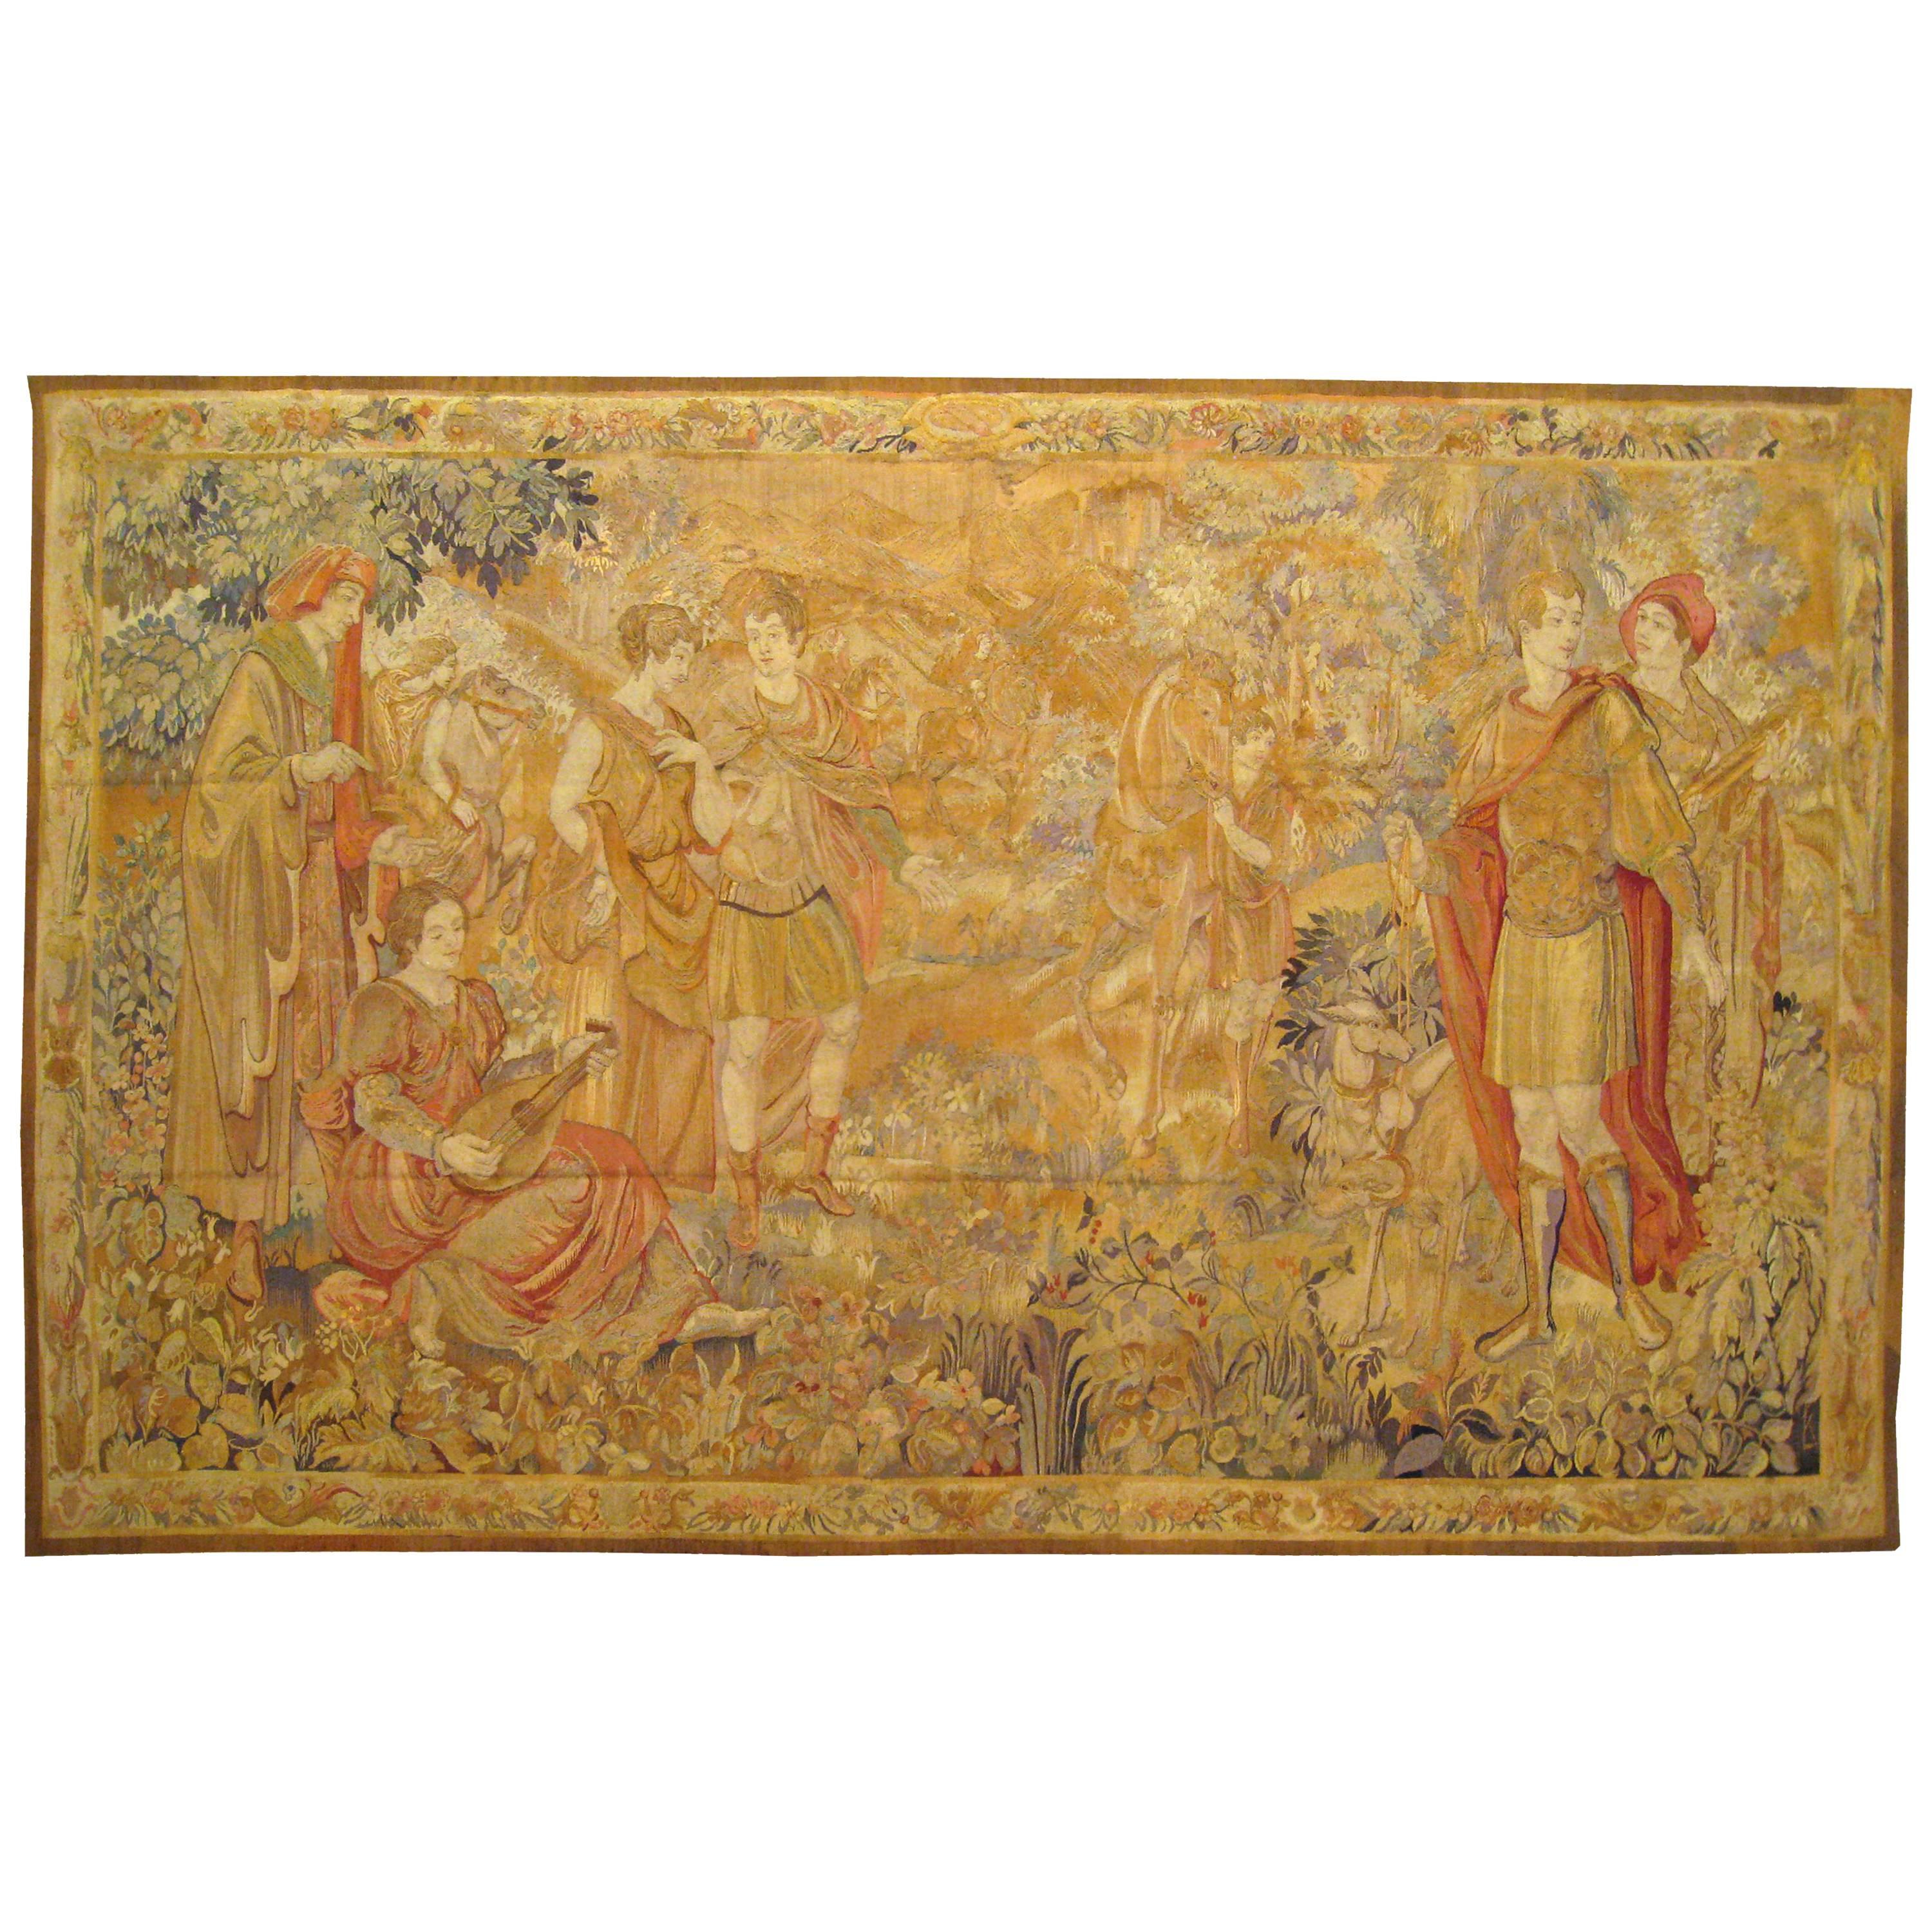 Late 19th Century French Loomed Tapestry, with Hunting Party in a Forest Setting